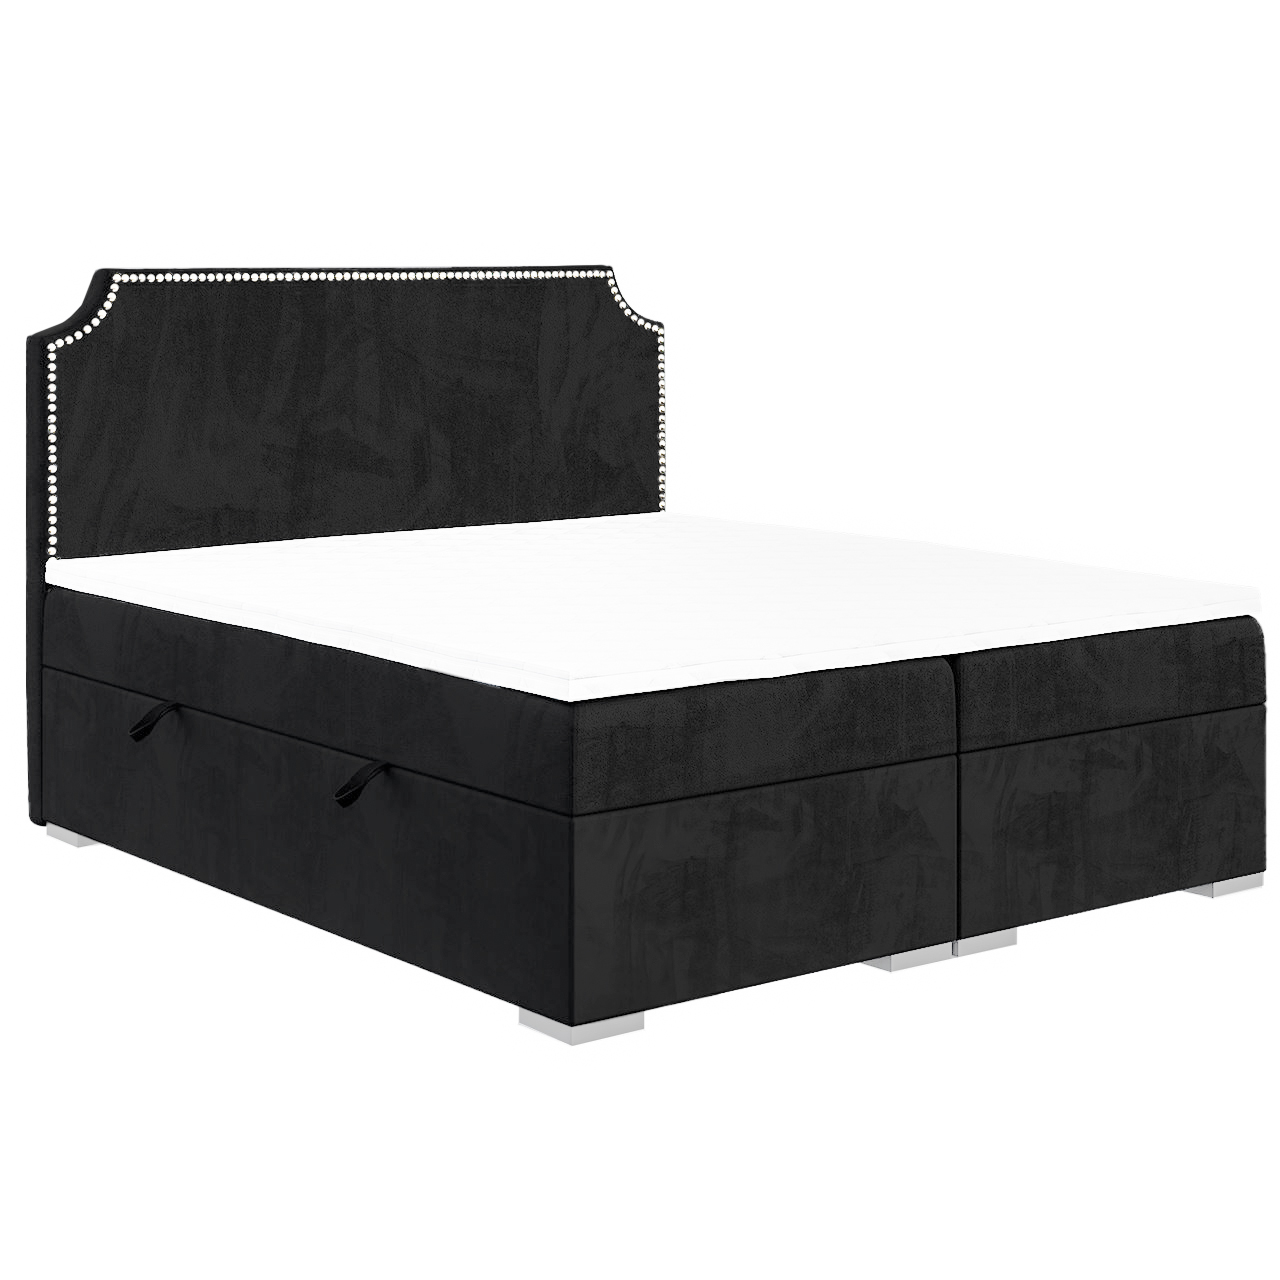 Upholstered bed LINA 180x200 riviera 100